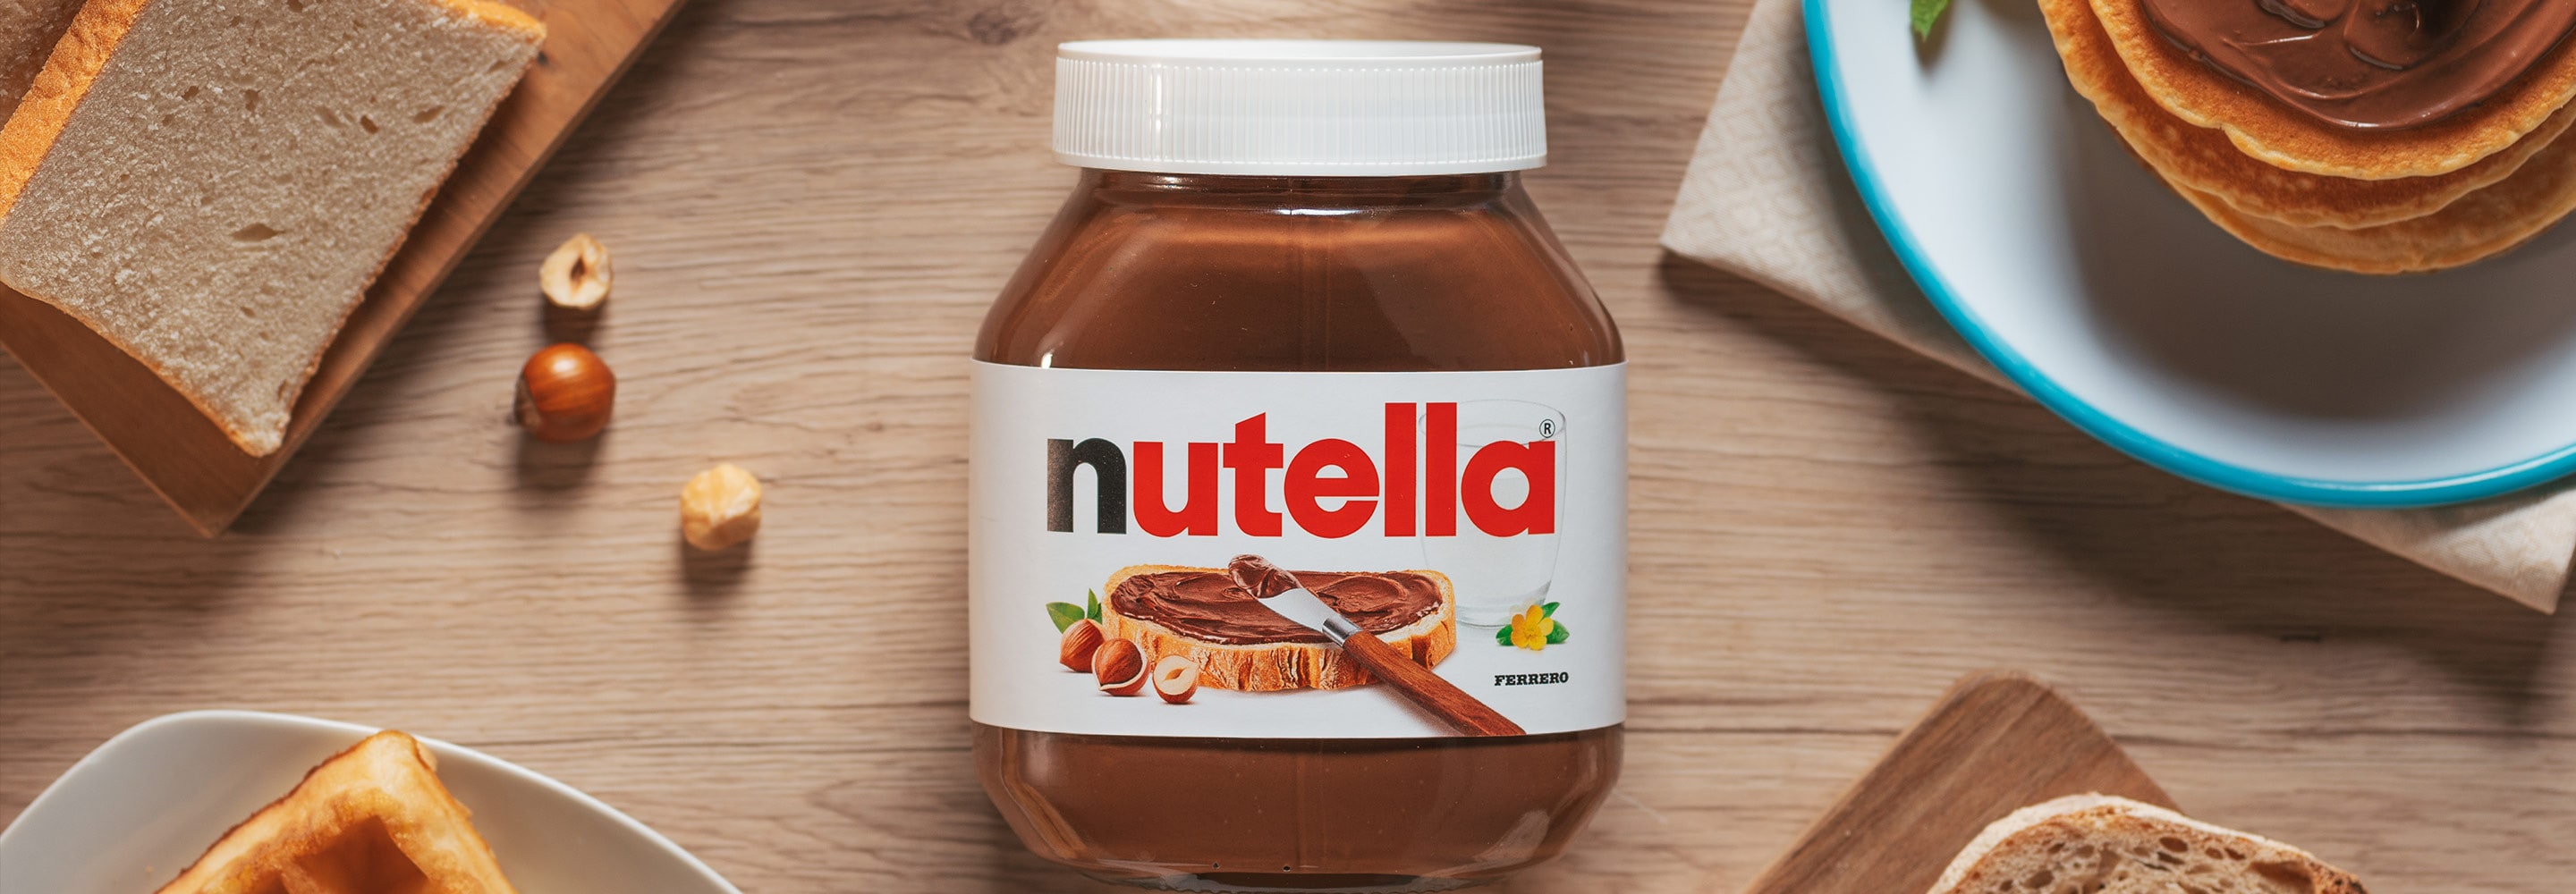 Nutella recipes from around the world